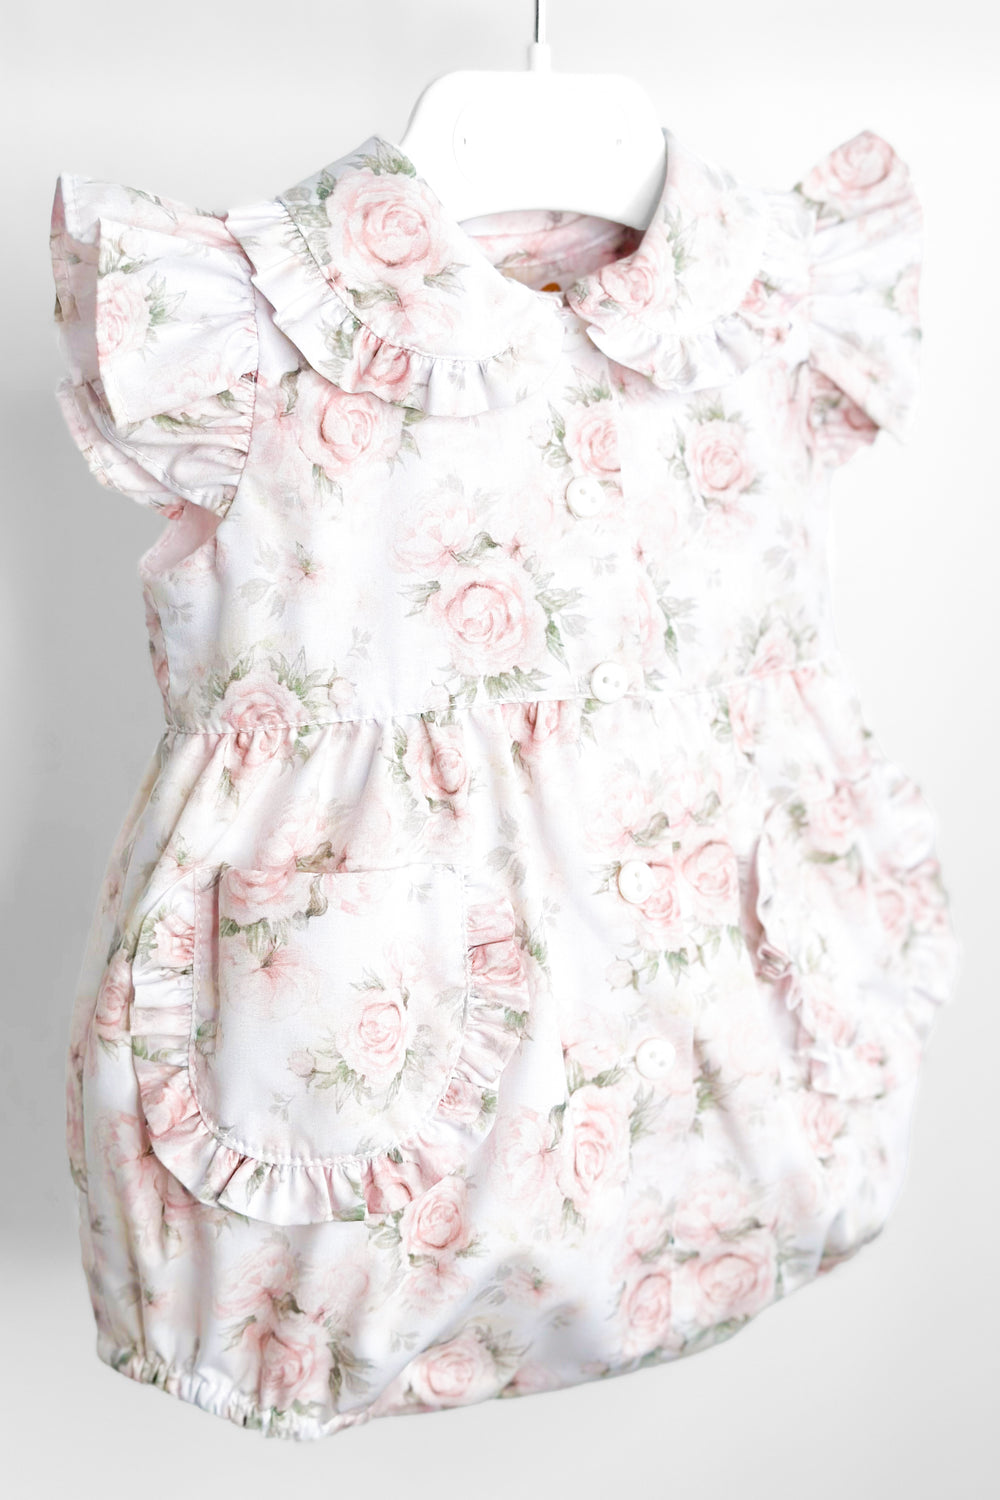 Puro Mimo "Wendy" Pale Pink Vintage Floral Romper | Millie and John